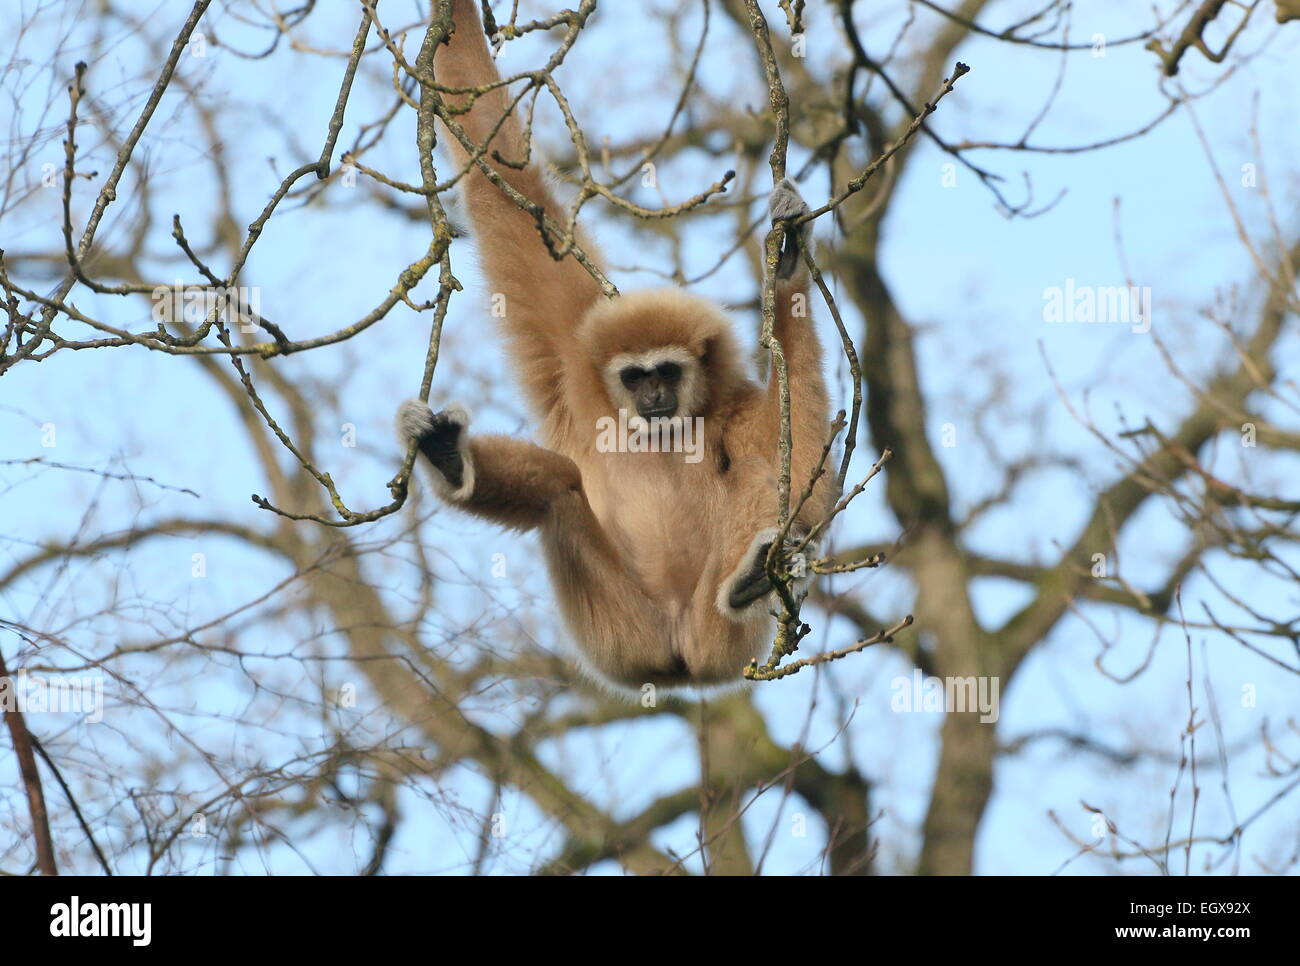 Asian Lar Gibbon or  White-Handed gibbon (Hylobates lar) swinging from branch to branch in a tree in winter Stock Photo